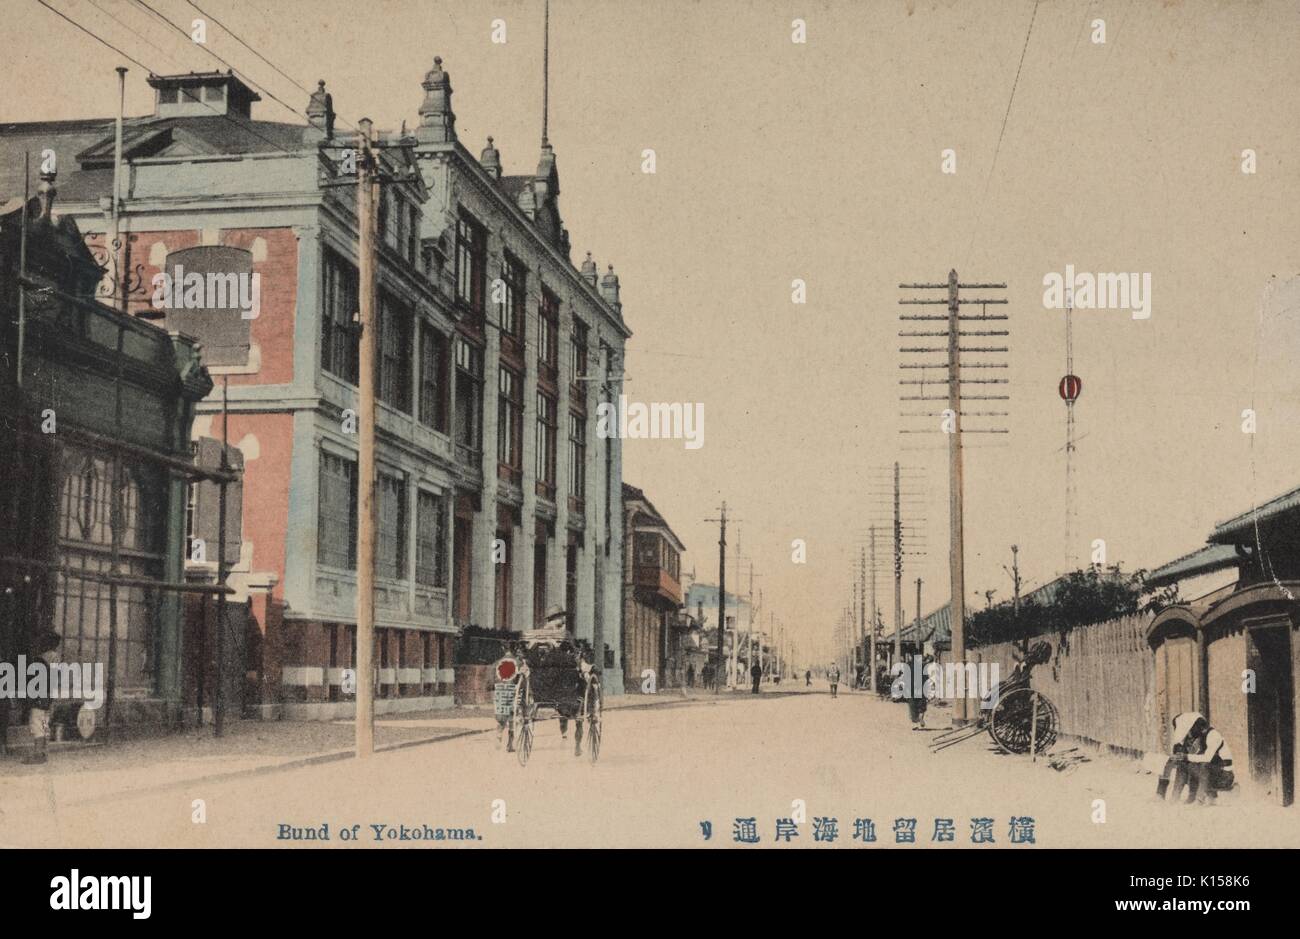 A postcard created from a tinted photograph, buildings are European style and the road is lined with utility poles, people can be seen on carts and on the street, in a European district called the bund, Yokohama, Japan, 1912. From the New York Public Library. Stock Photo